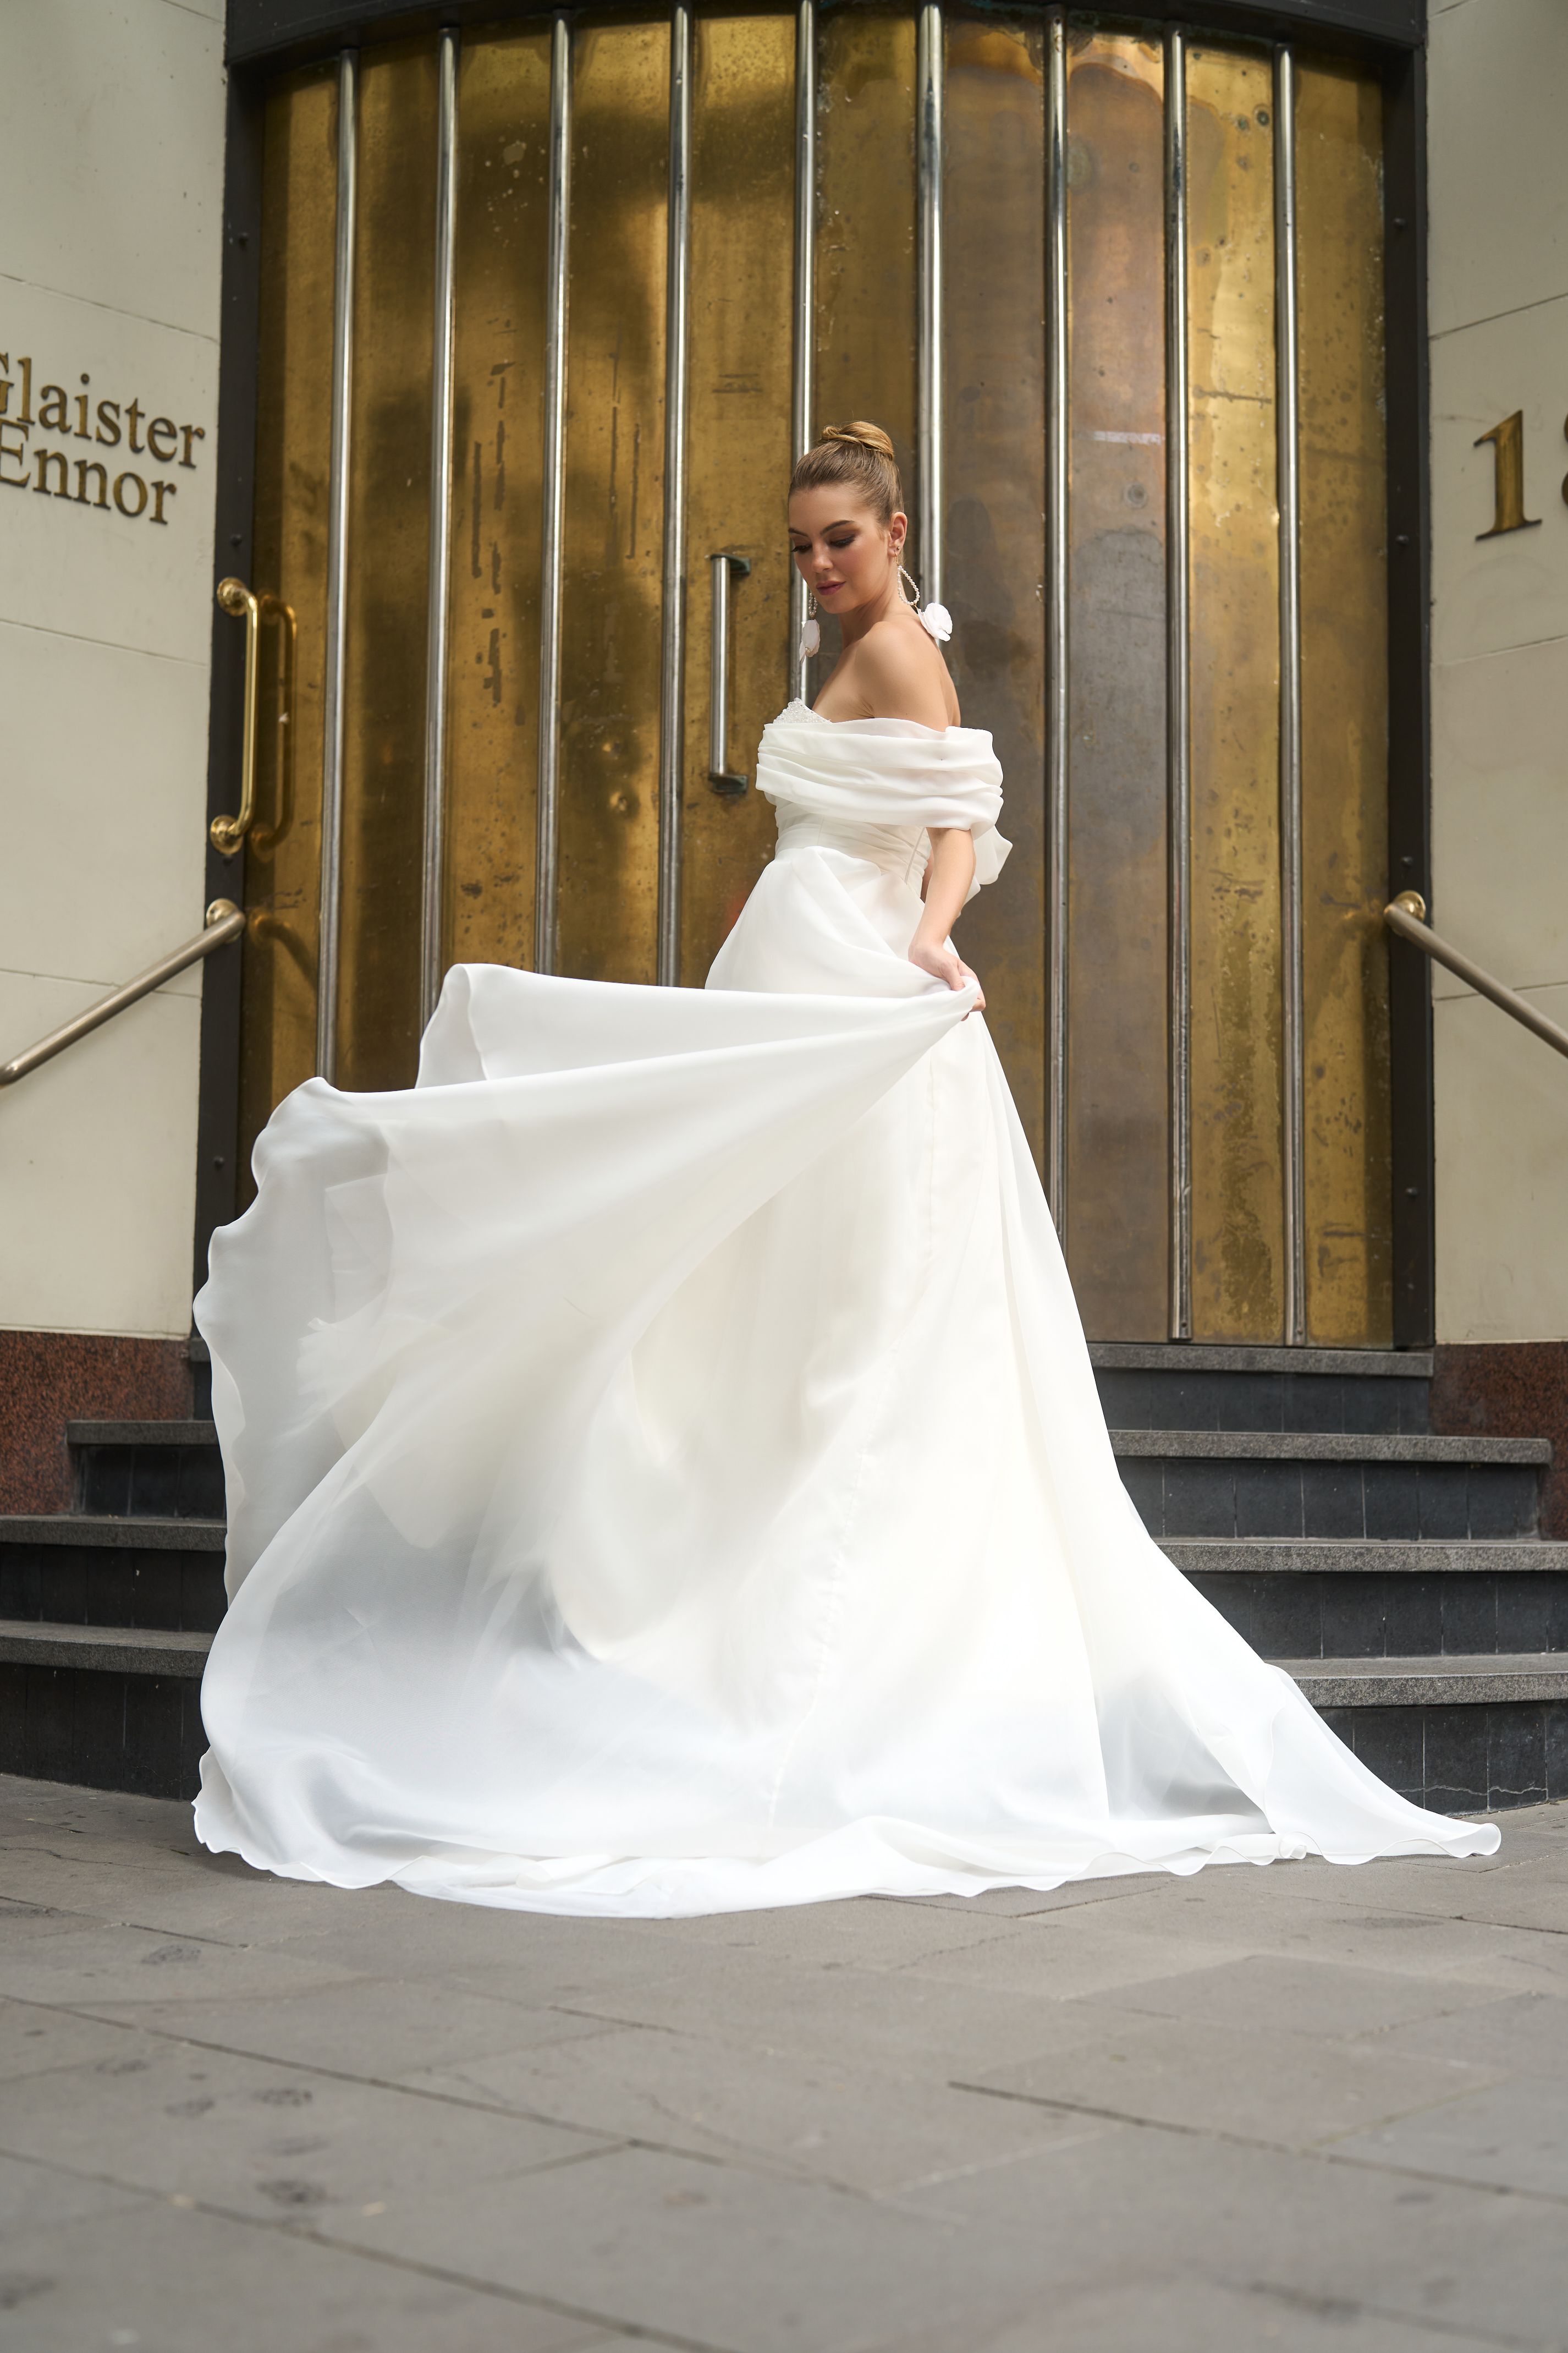 Rhianna wedding dress in sheer Organza fabric with off-the-shoulder pleated band and A-line silhouette. Wide waistband and light skirt with chapel train. High split adds a modern touch and ease of movement for walking and dancing all day.